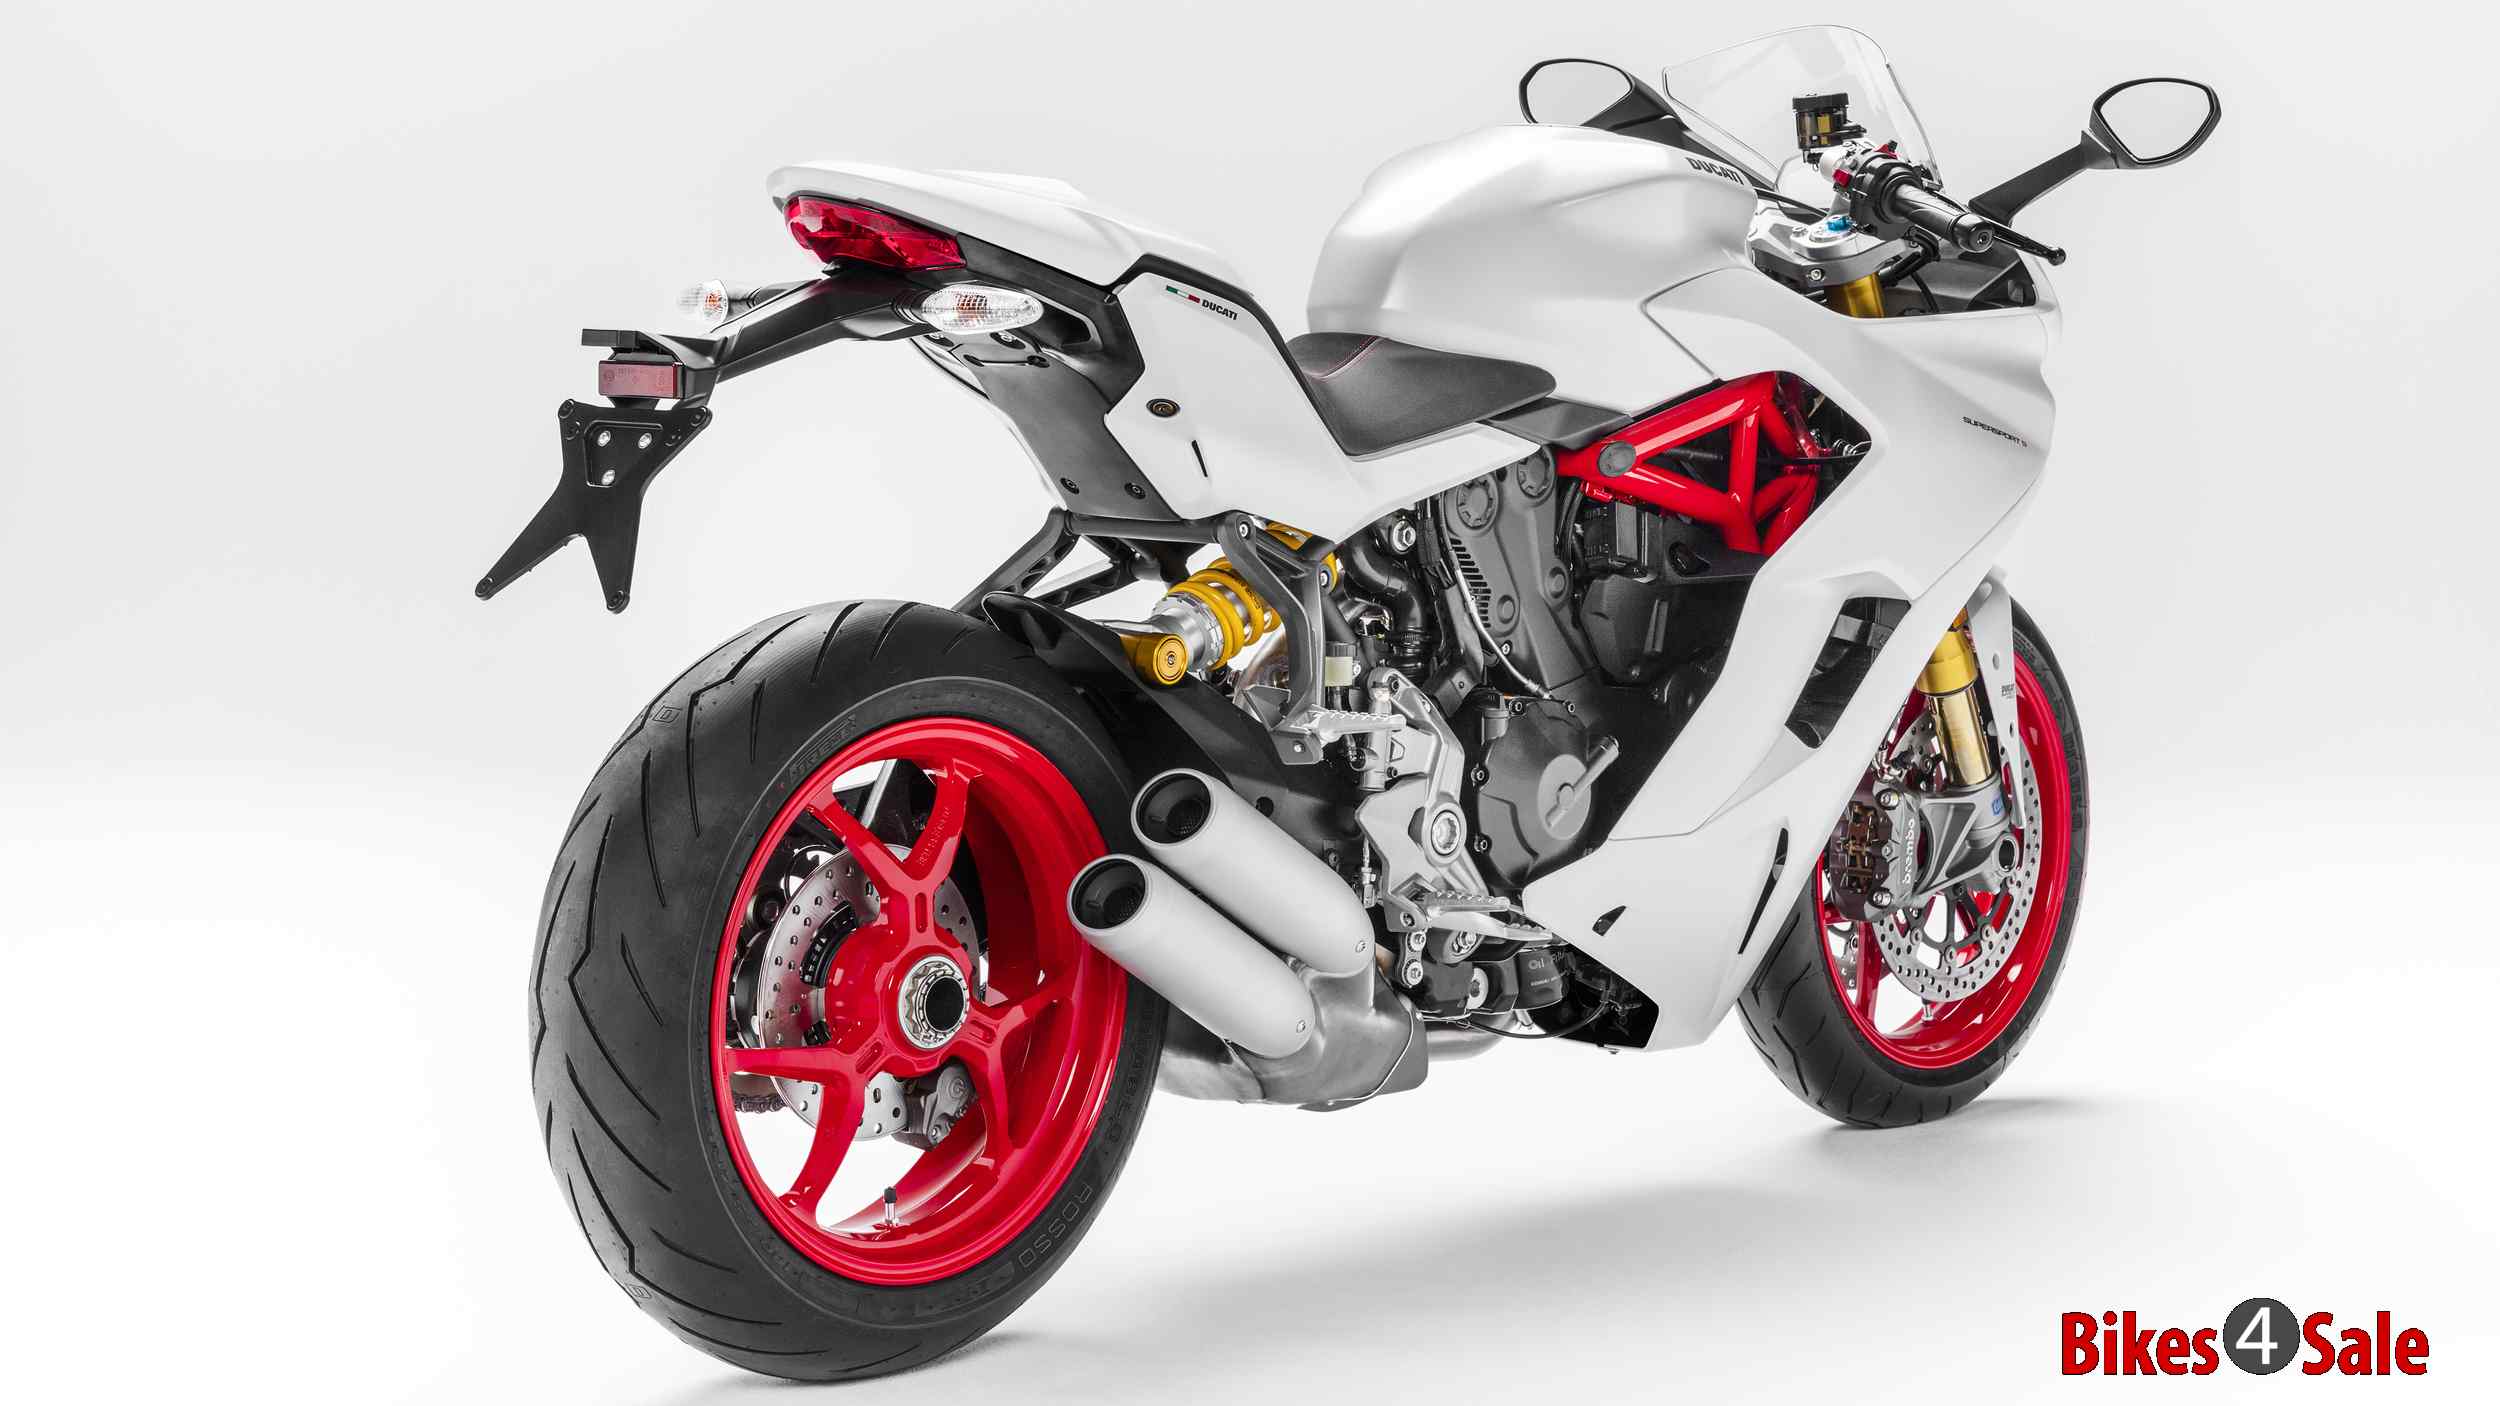 Ducati Supersport Rear View